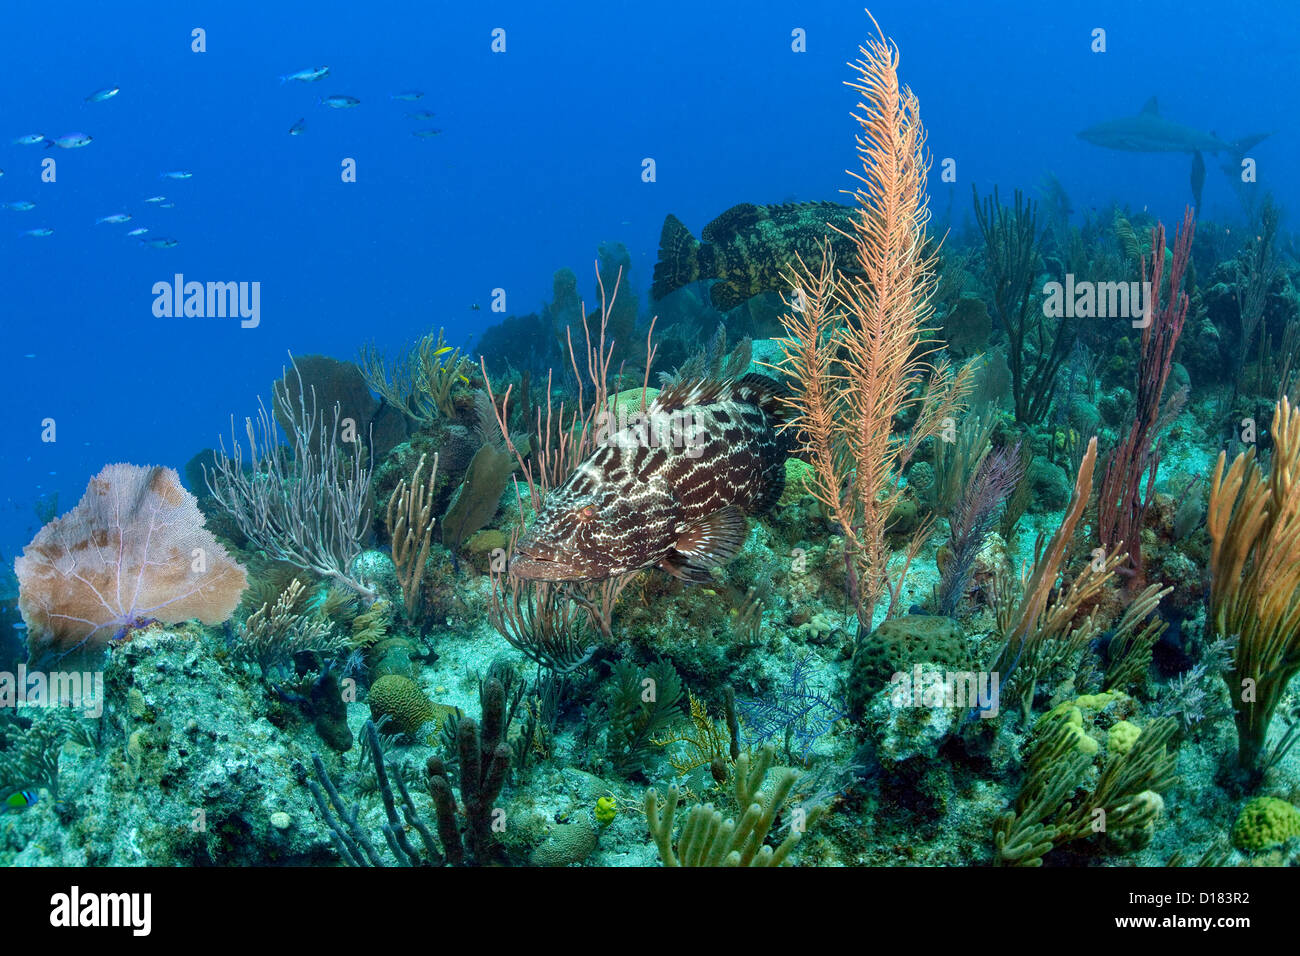 A grouper swims over a coral reef. Stock Photo